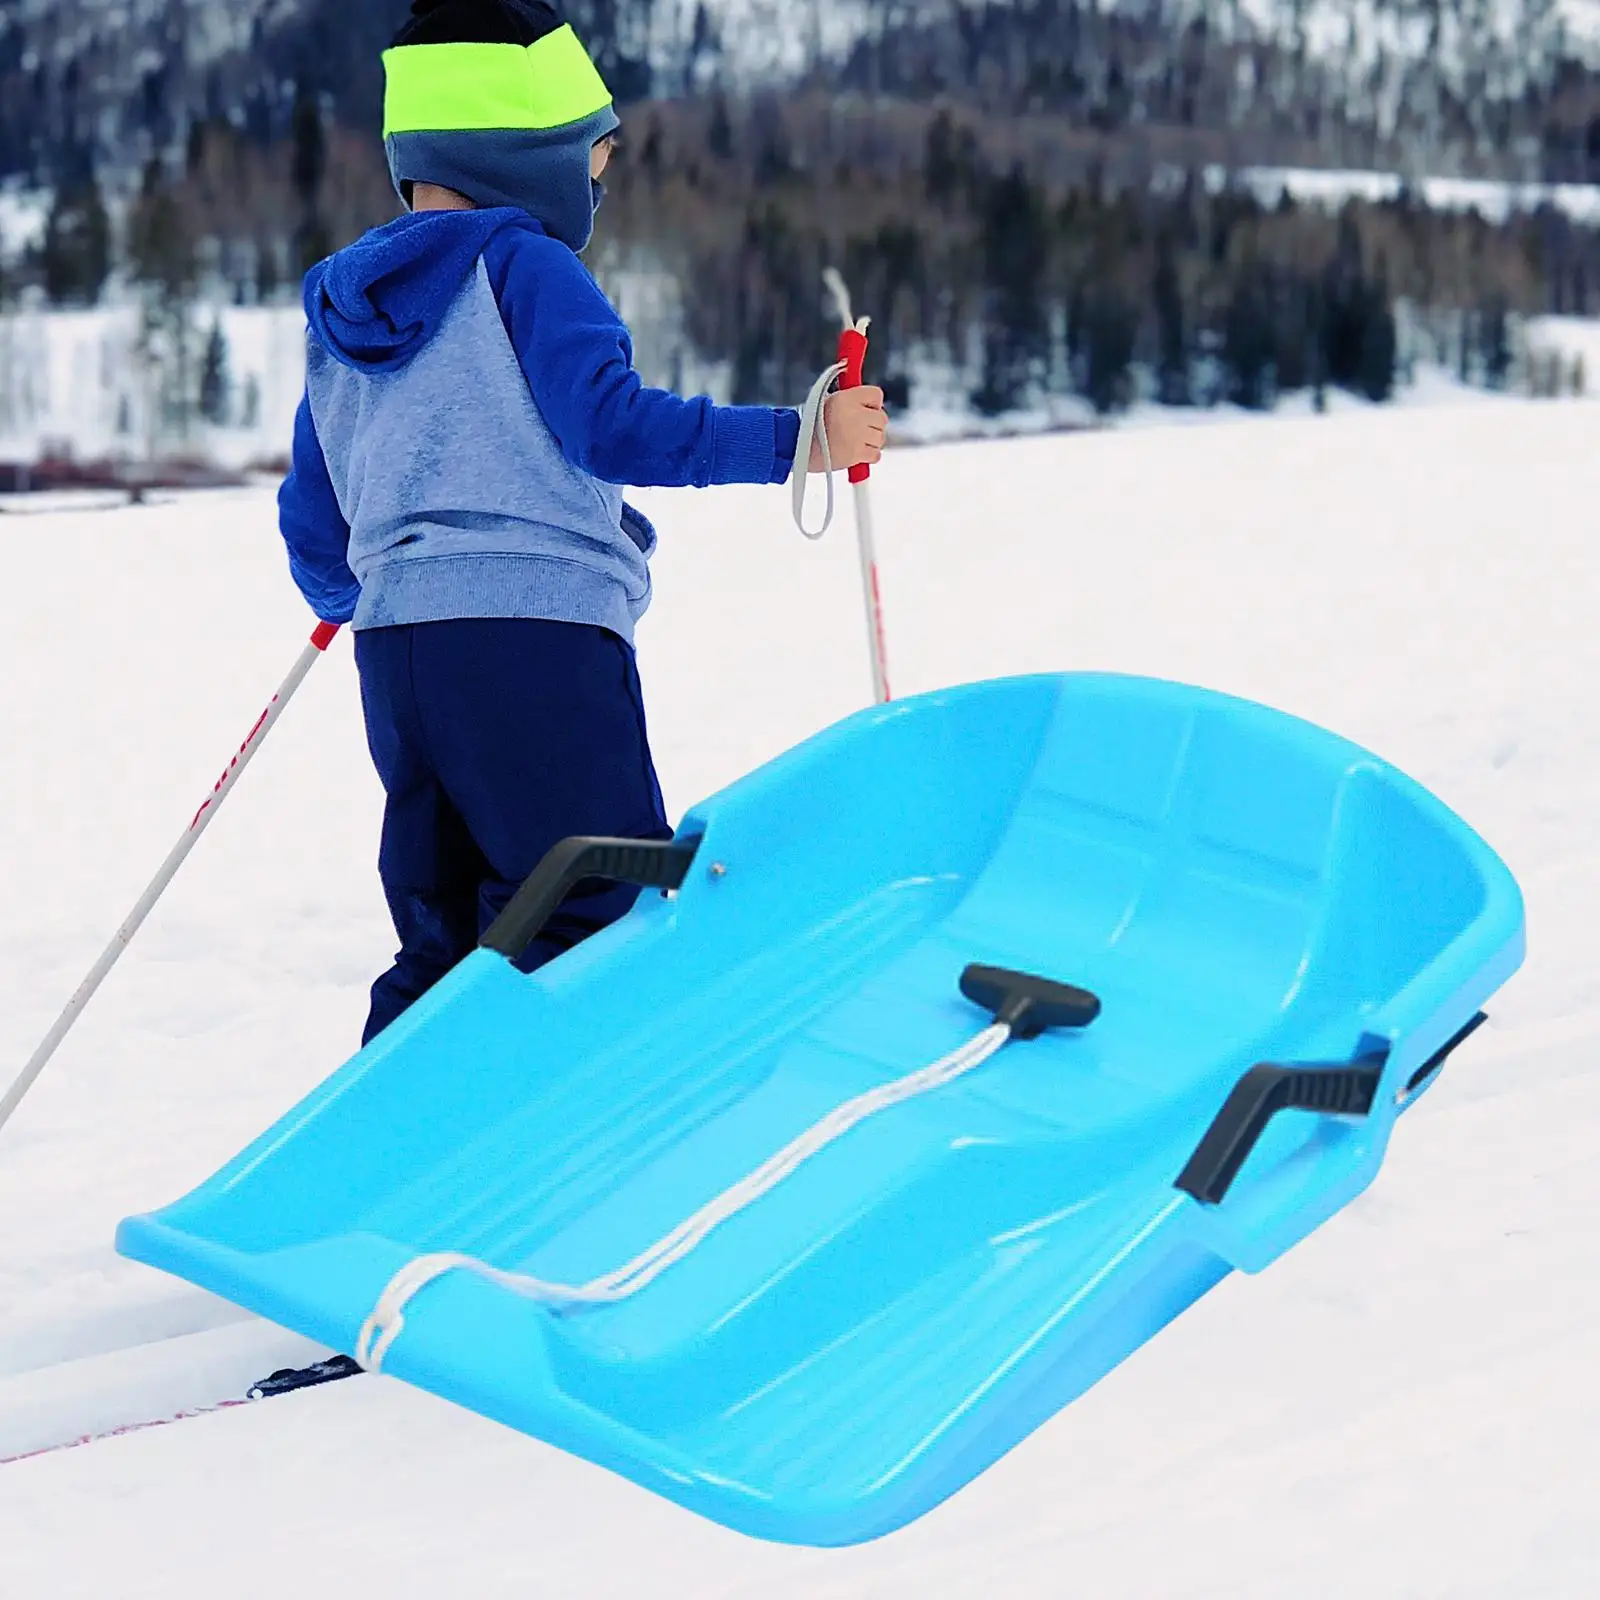 KIDS HEAVY DUTY SNOW SLEDGE TOBOGGAN SLEIGH with PULL ROPE SAFETY HANDLES